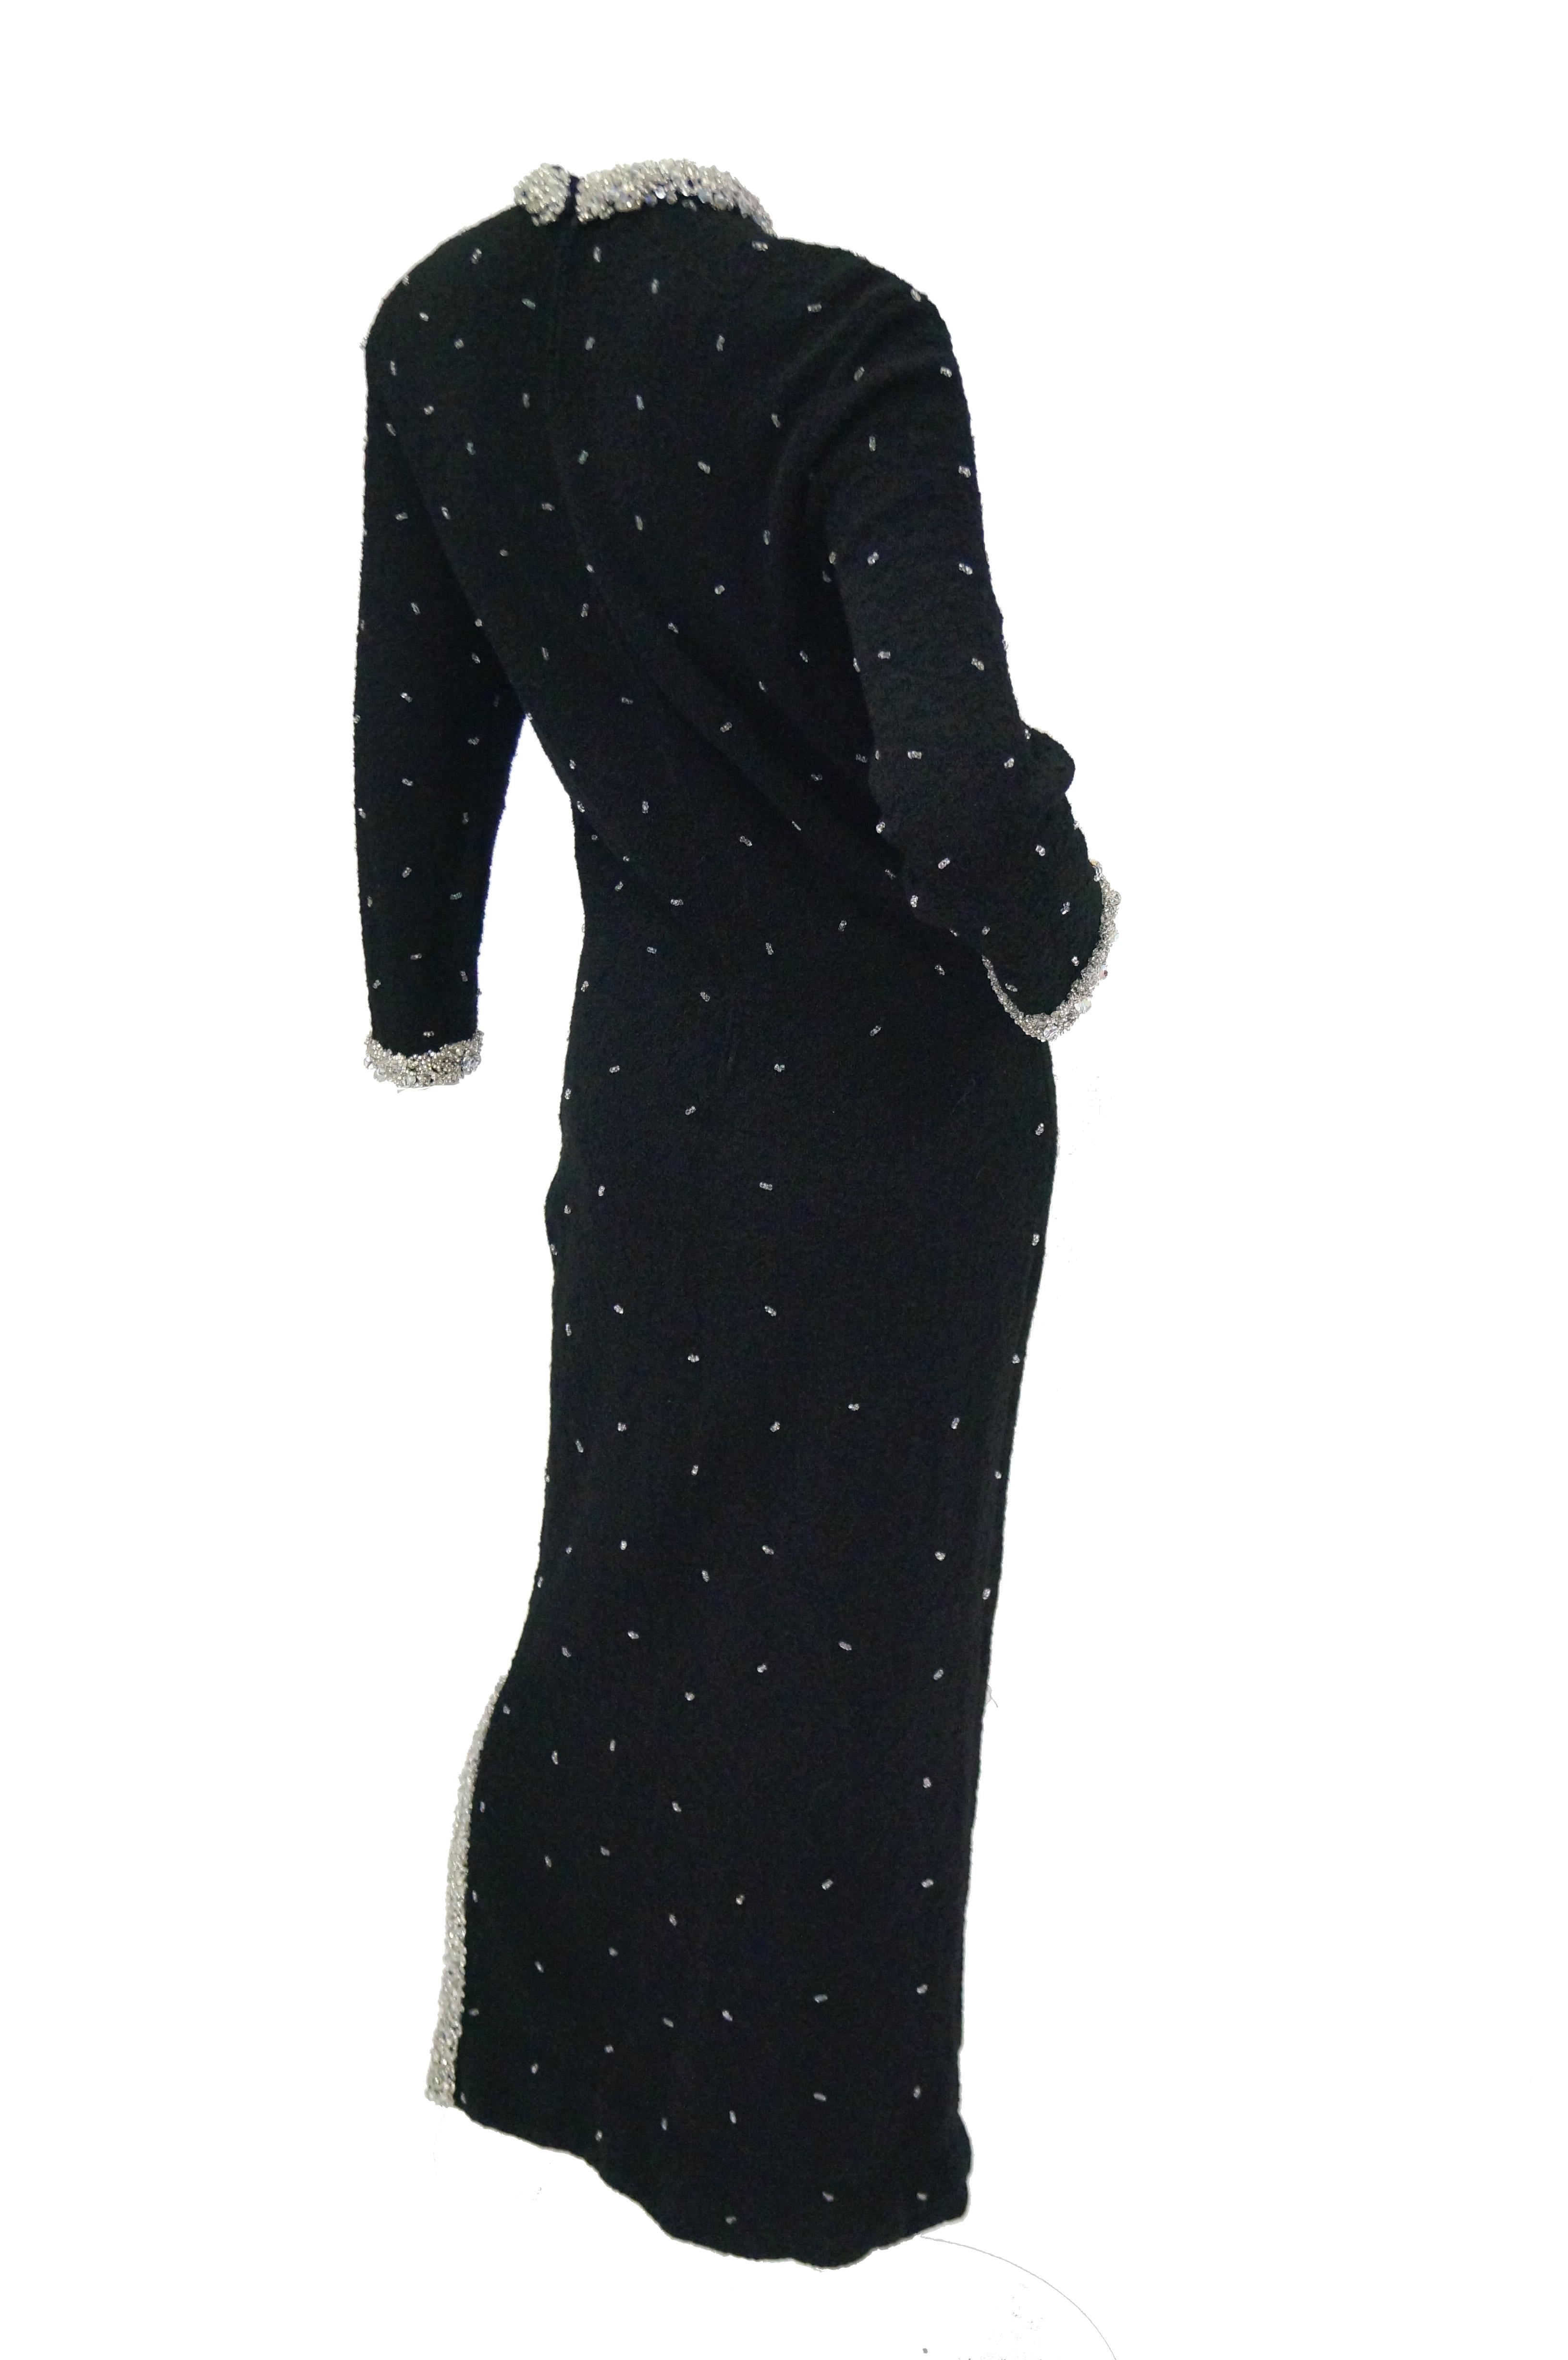 Women's or Men's 1960s Black Wool Knit Evening Dress Featuring Silver Glass Seed Bead Detail For Sale